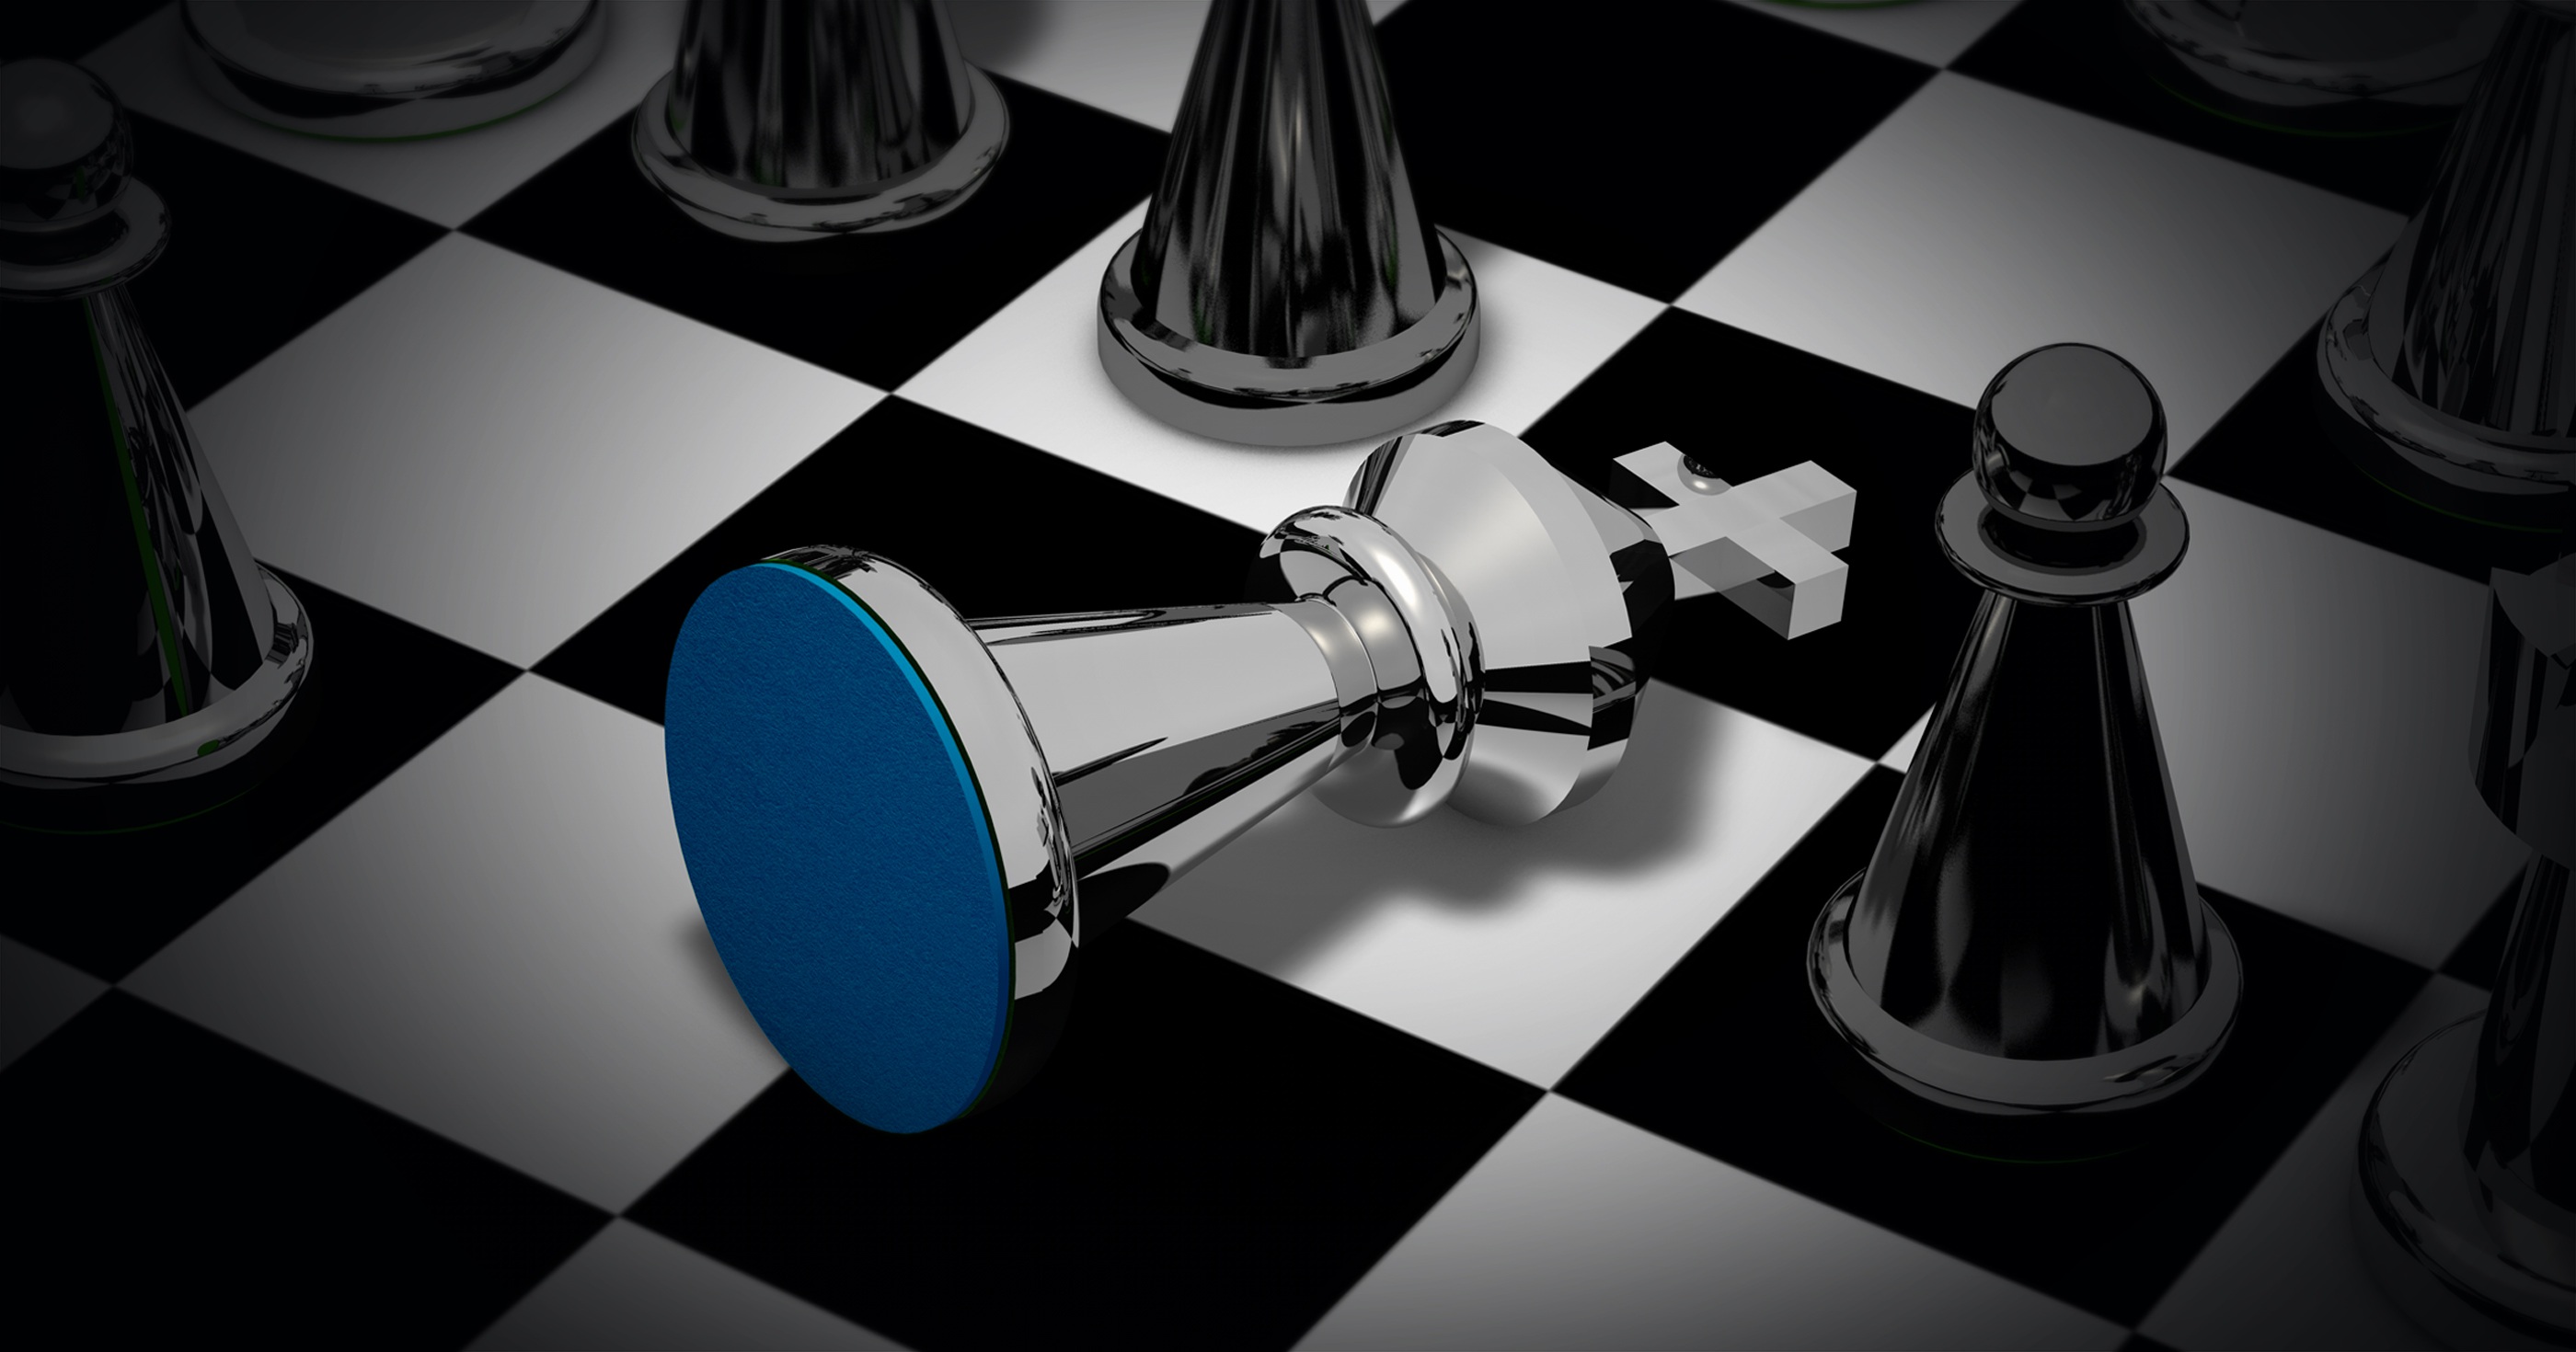 Checkmate Your Competition: How to Leverage the Power of the CHATGPT Queen in Chess and Your Business